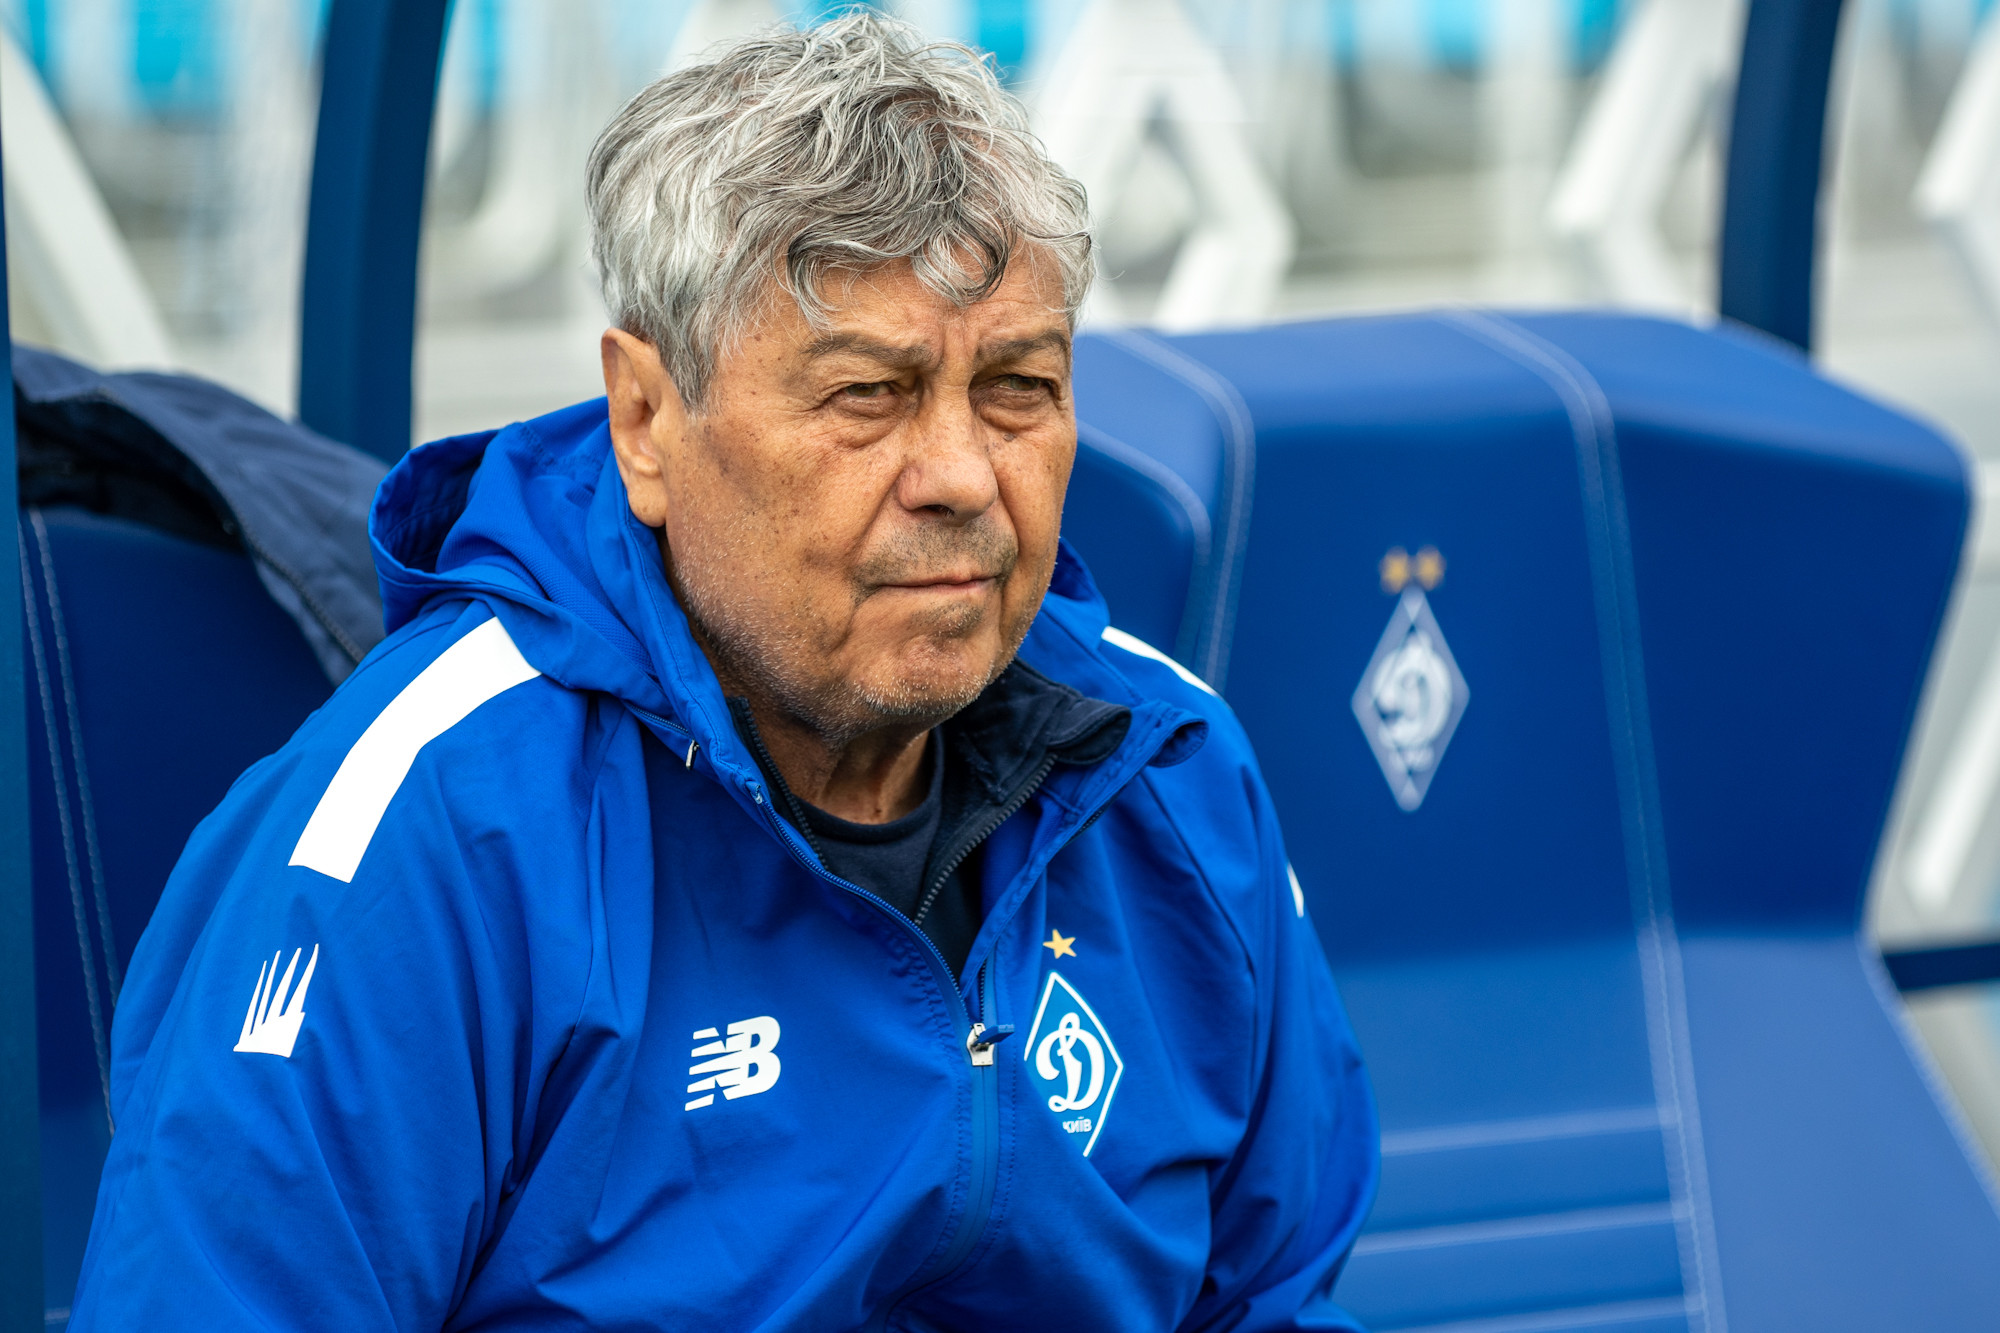 Press conference of Mircea Lucescu after the match against Mynai